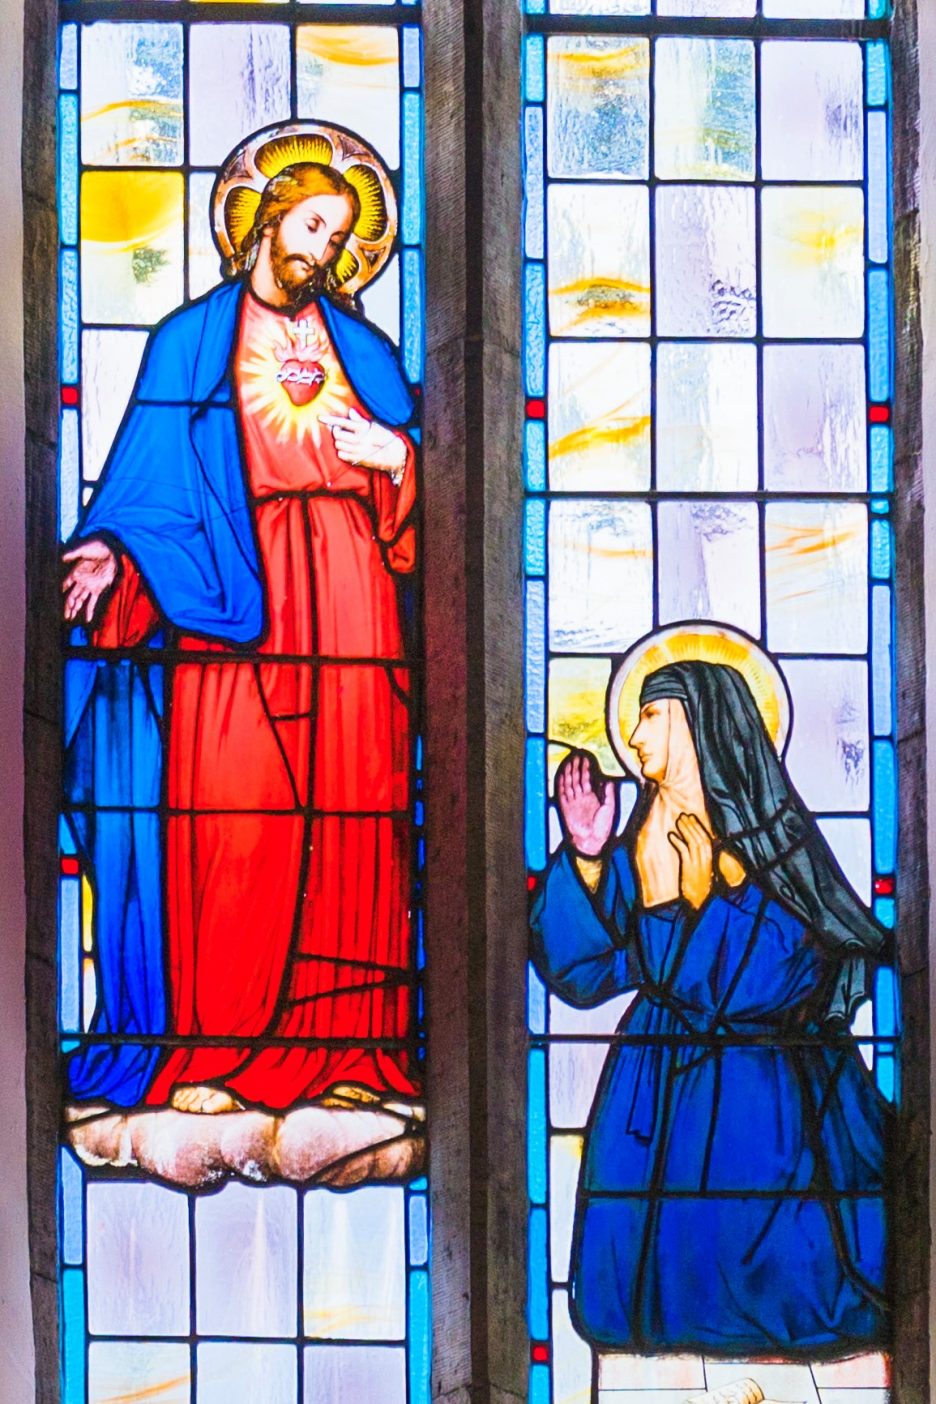 Sacred Heart Images Galway (8 of 3) (2)